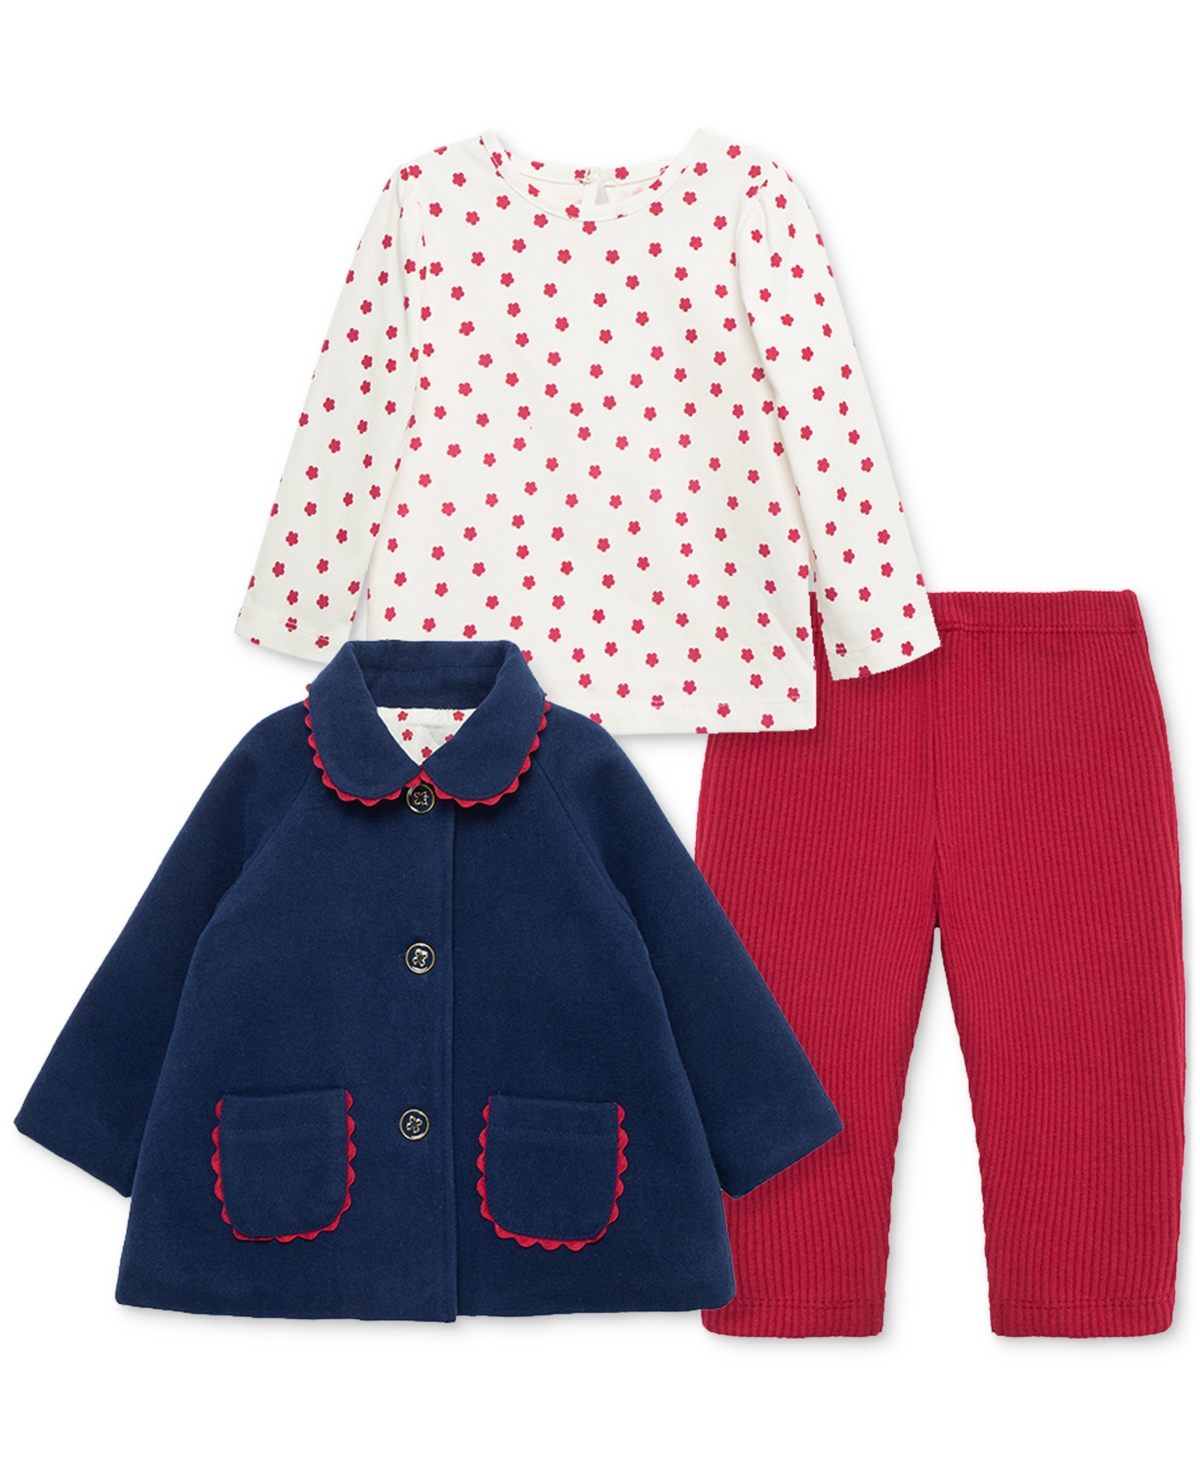 Little Me Baby Girls Bow Wool Jacket, Printed Top And Leggings, 3 Piece Set In --